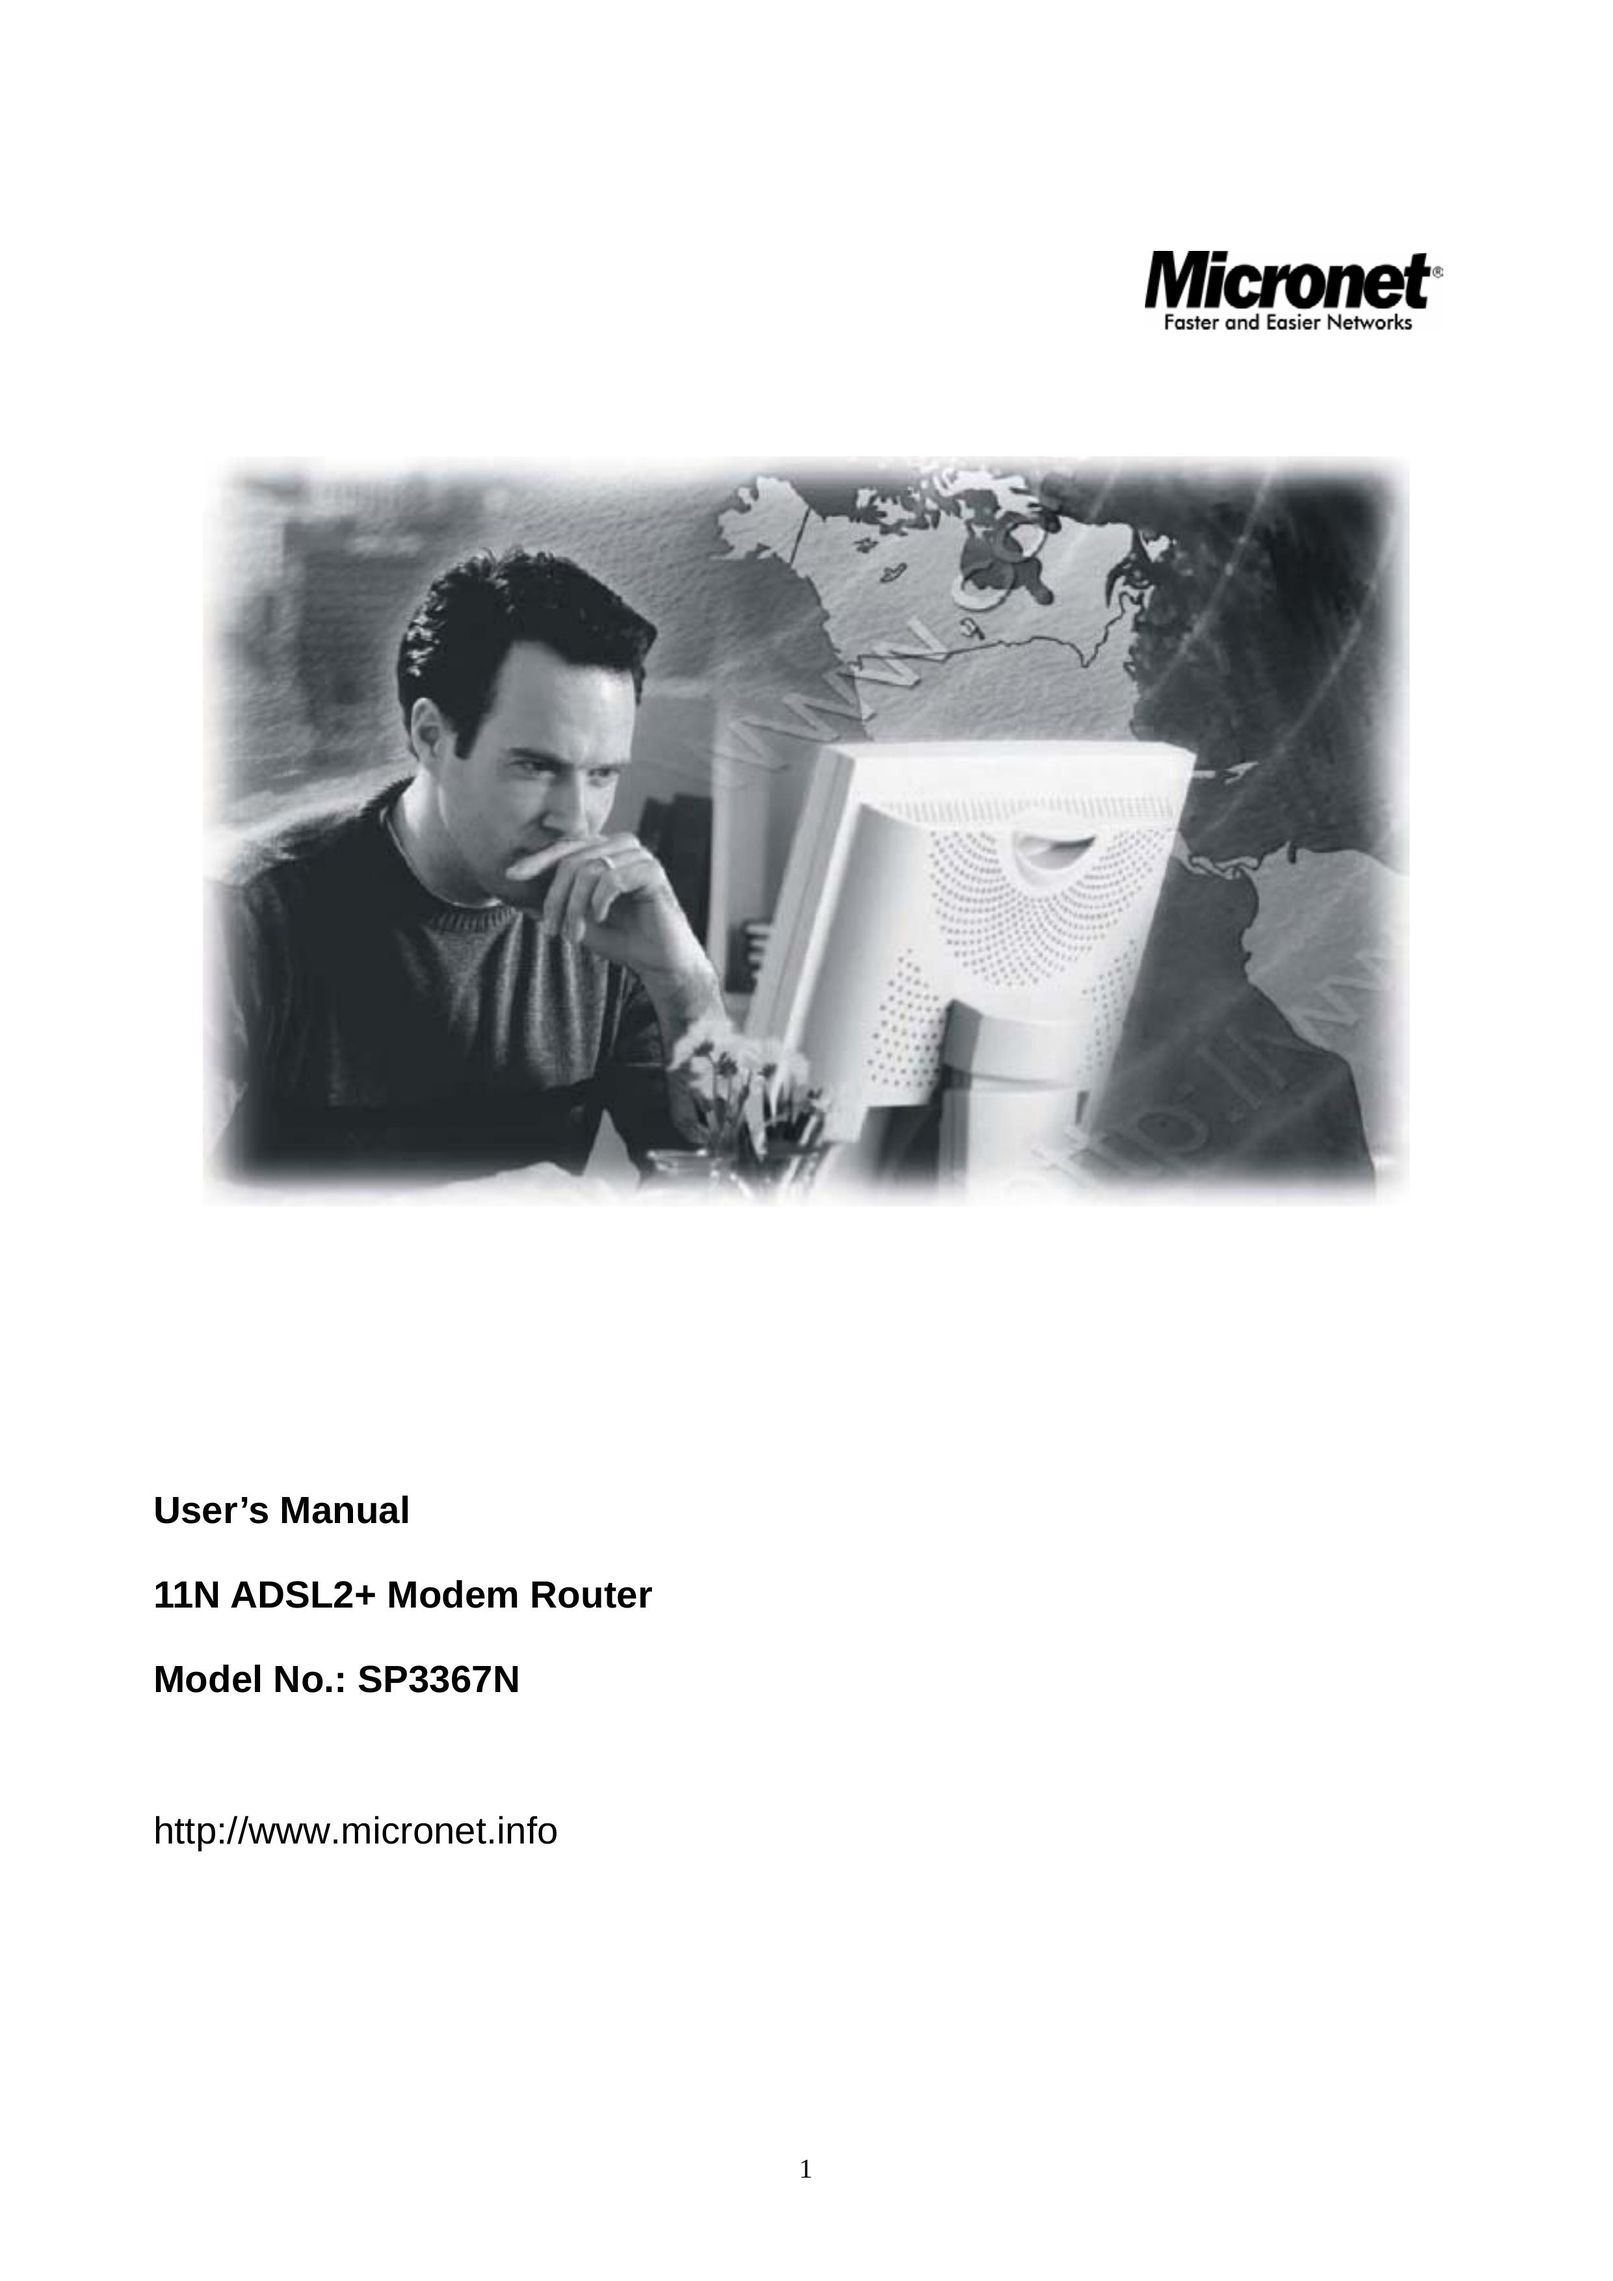 MicroNet Technology SP3367N Network Router User Manual